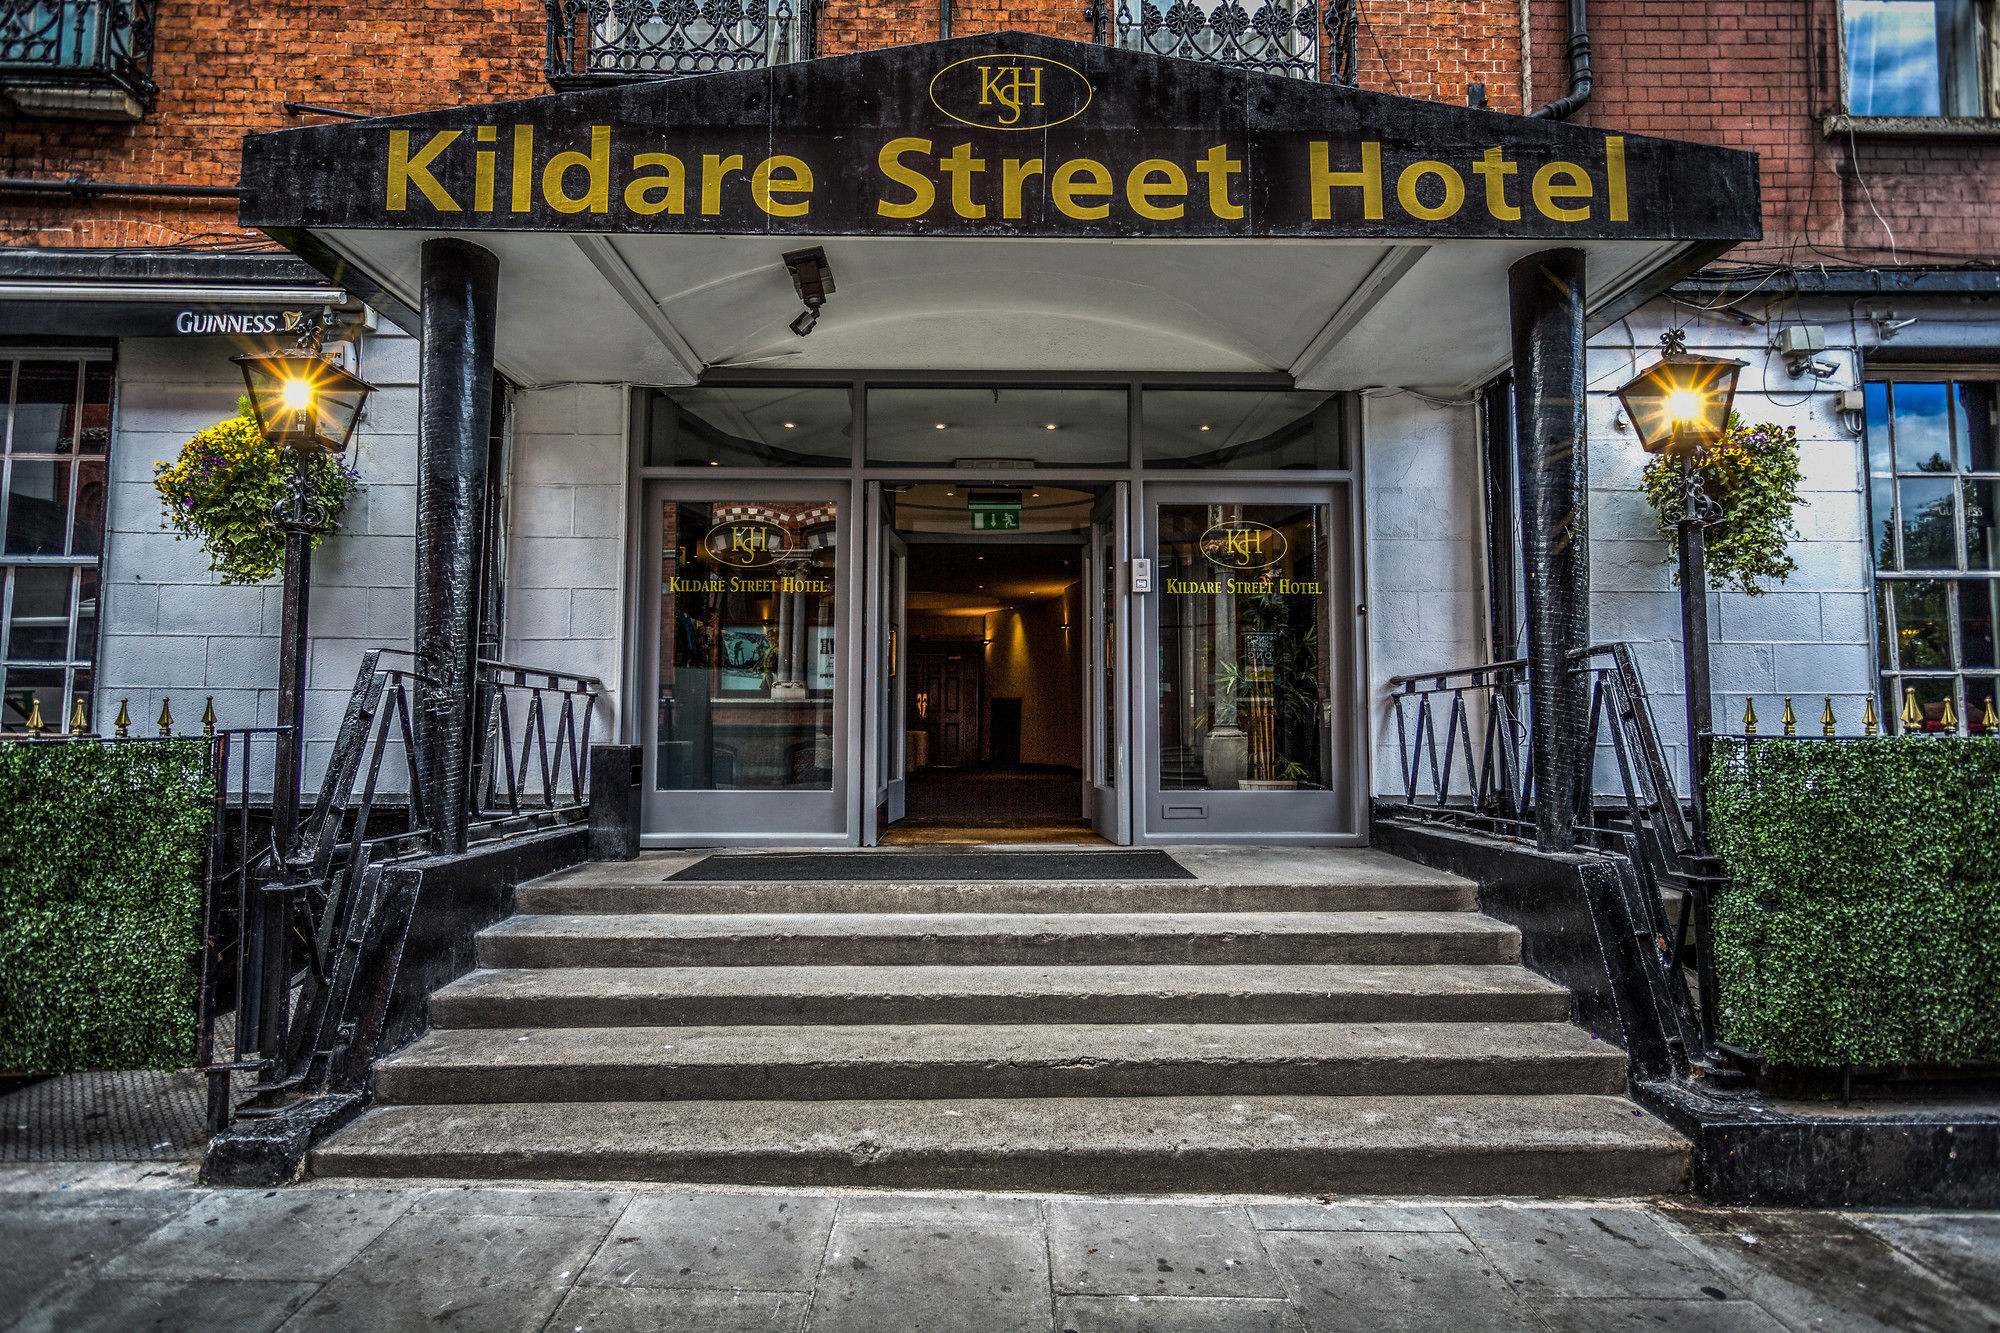 The Kildare Street Hotel By Thekeycollections Dublín Exterior foto